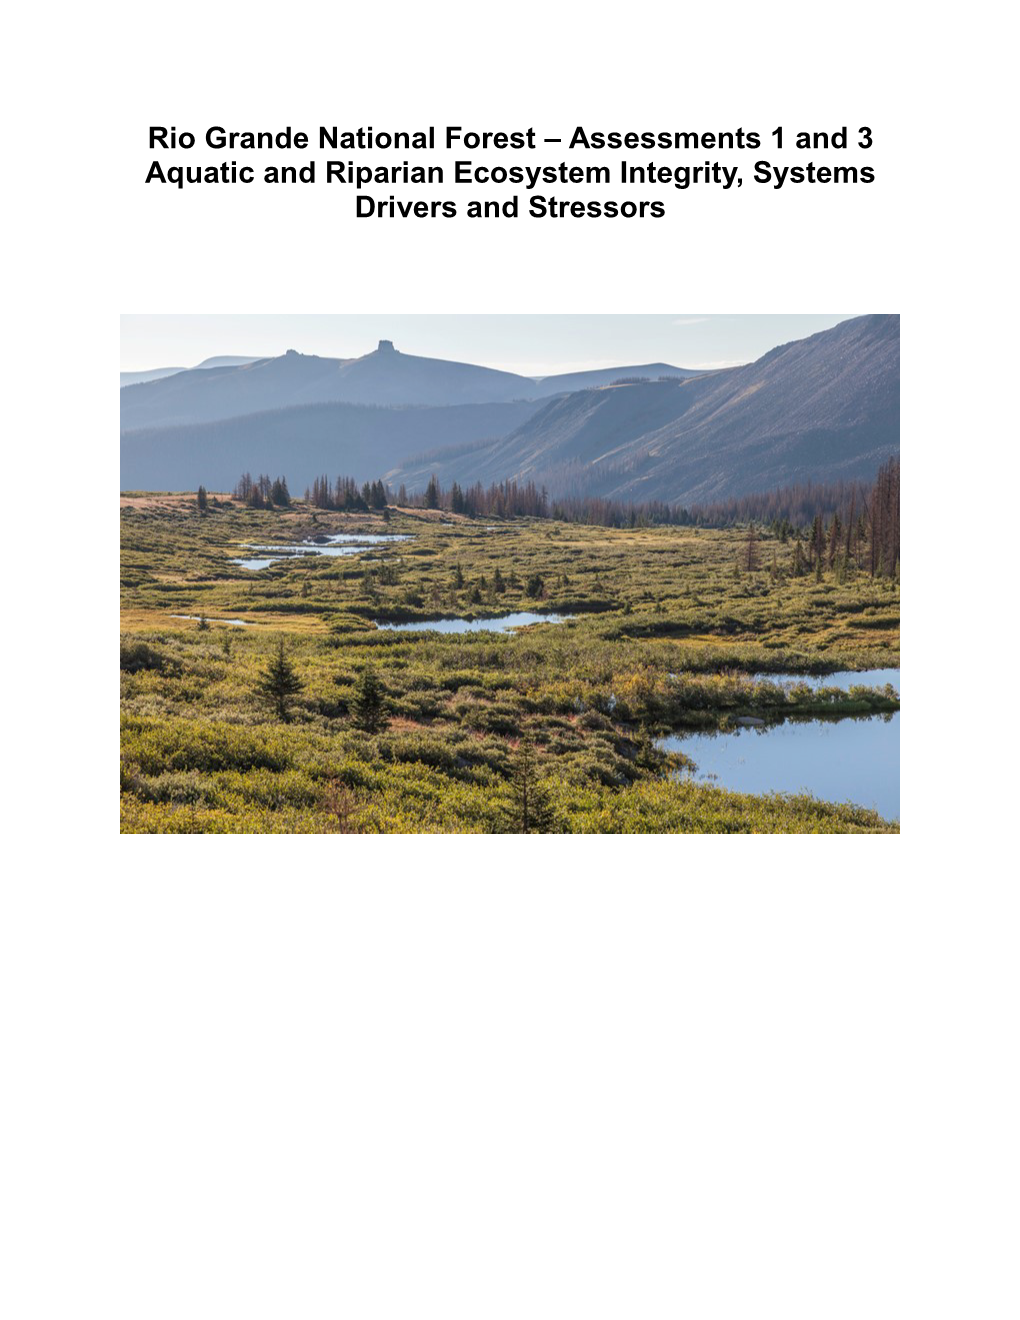 Rio Grande National Forest – Assessments 1 and 3 Aquatic and Riparian Ecosystem Integrity, Systems Drivers and Stressors